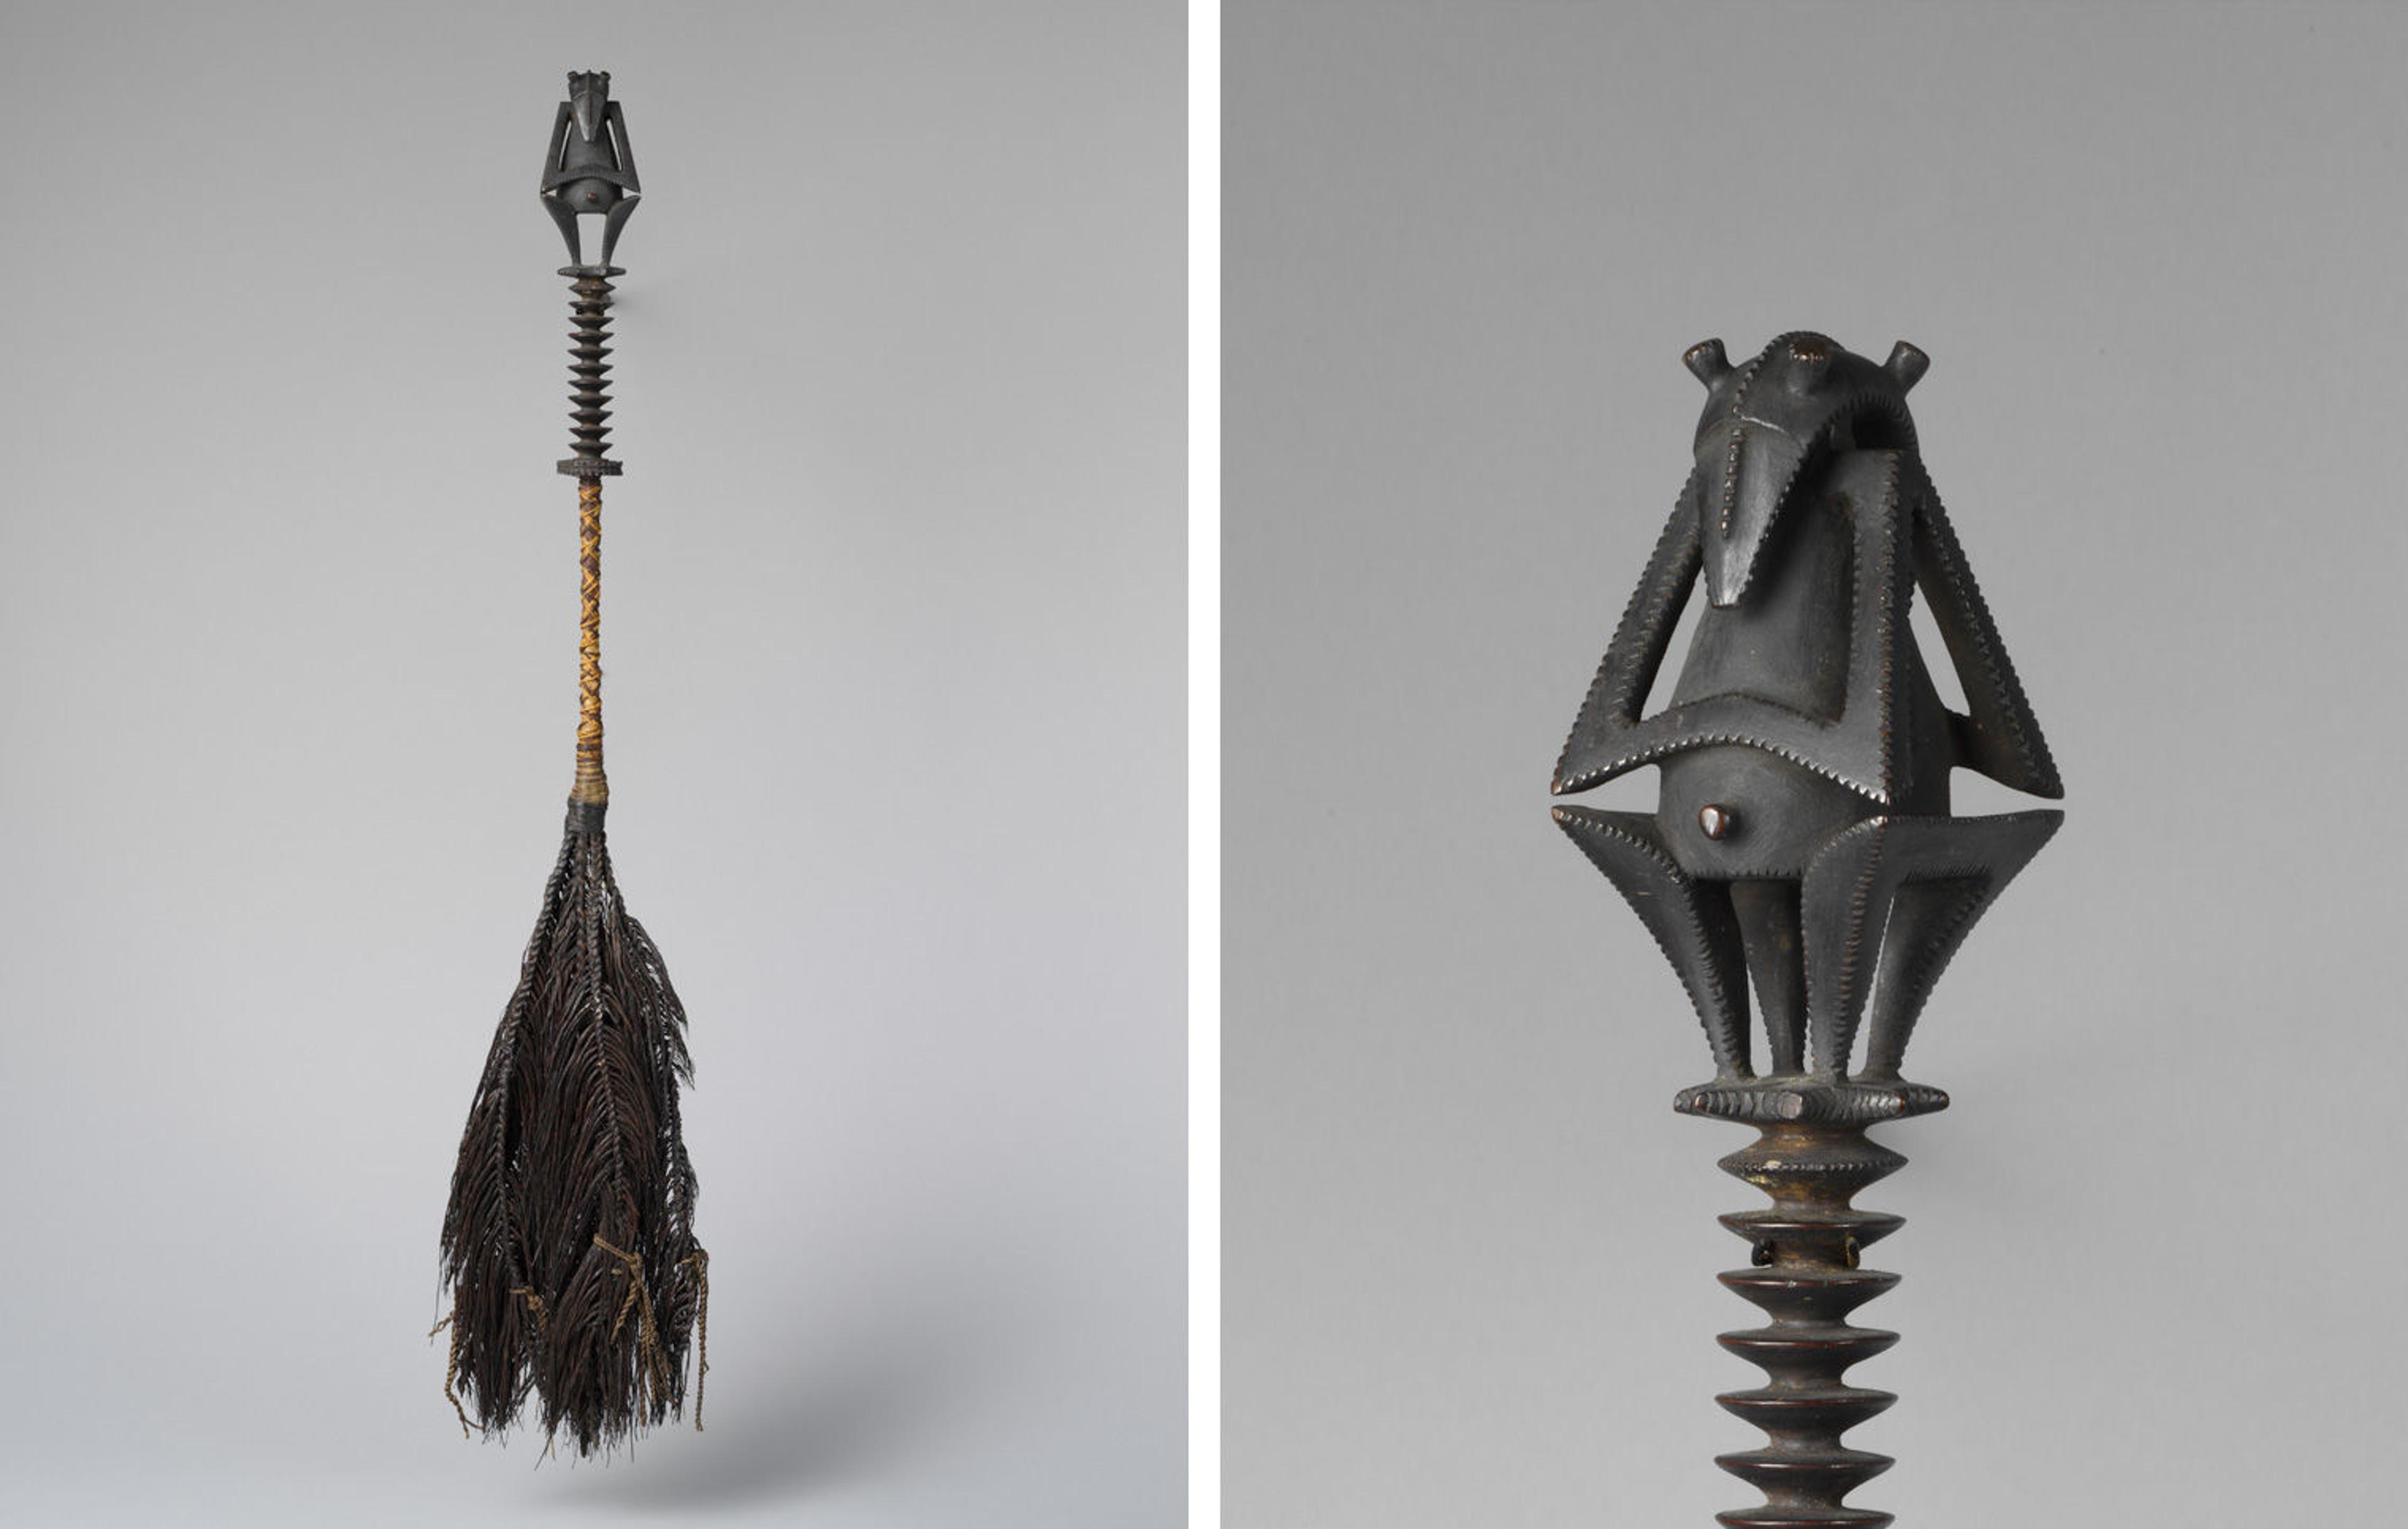 Two views of a flywhisk from the Austral Islands made of wood, coconut fiber, and human hair